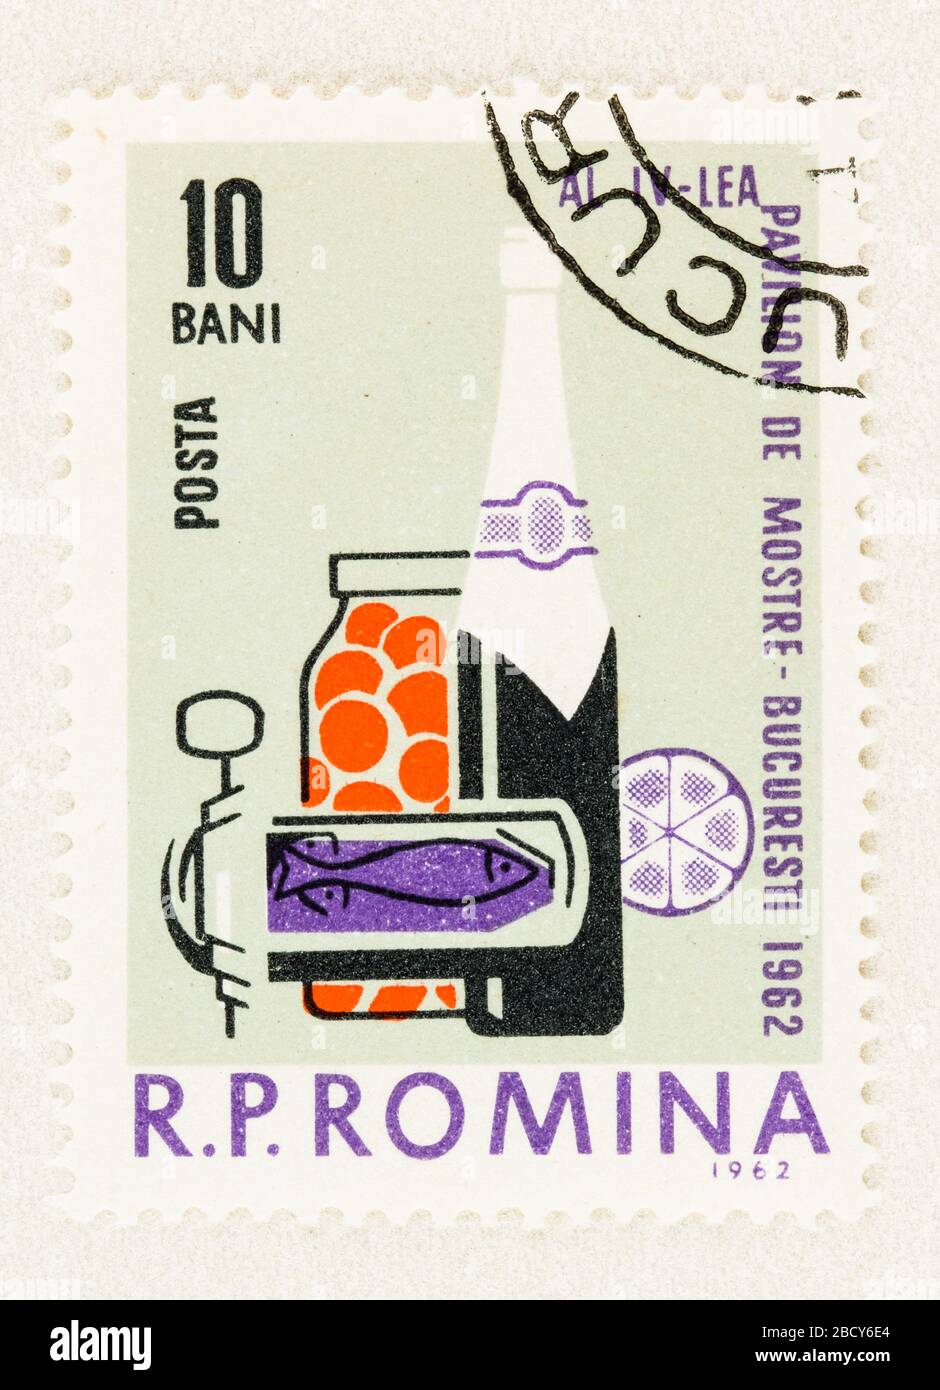 SEATTLE WASHINGTON - April 3, 2020: Close up of 1962  Romania stamp commemorating the Bucharest Trade Fair with samples of wine and food. Stock Photo